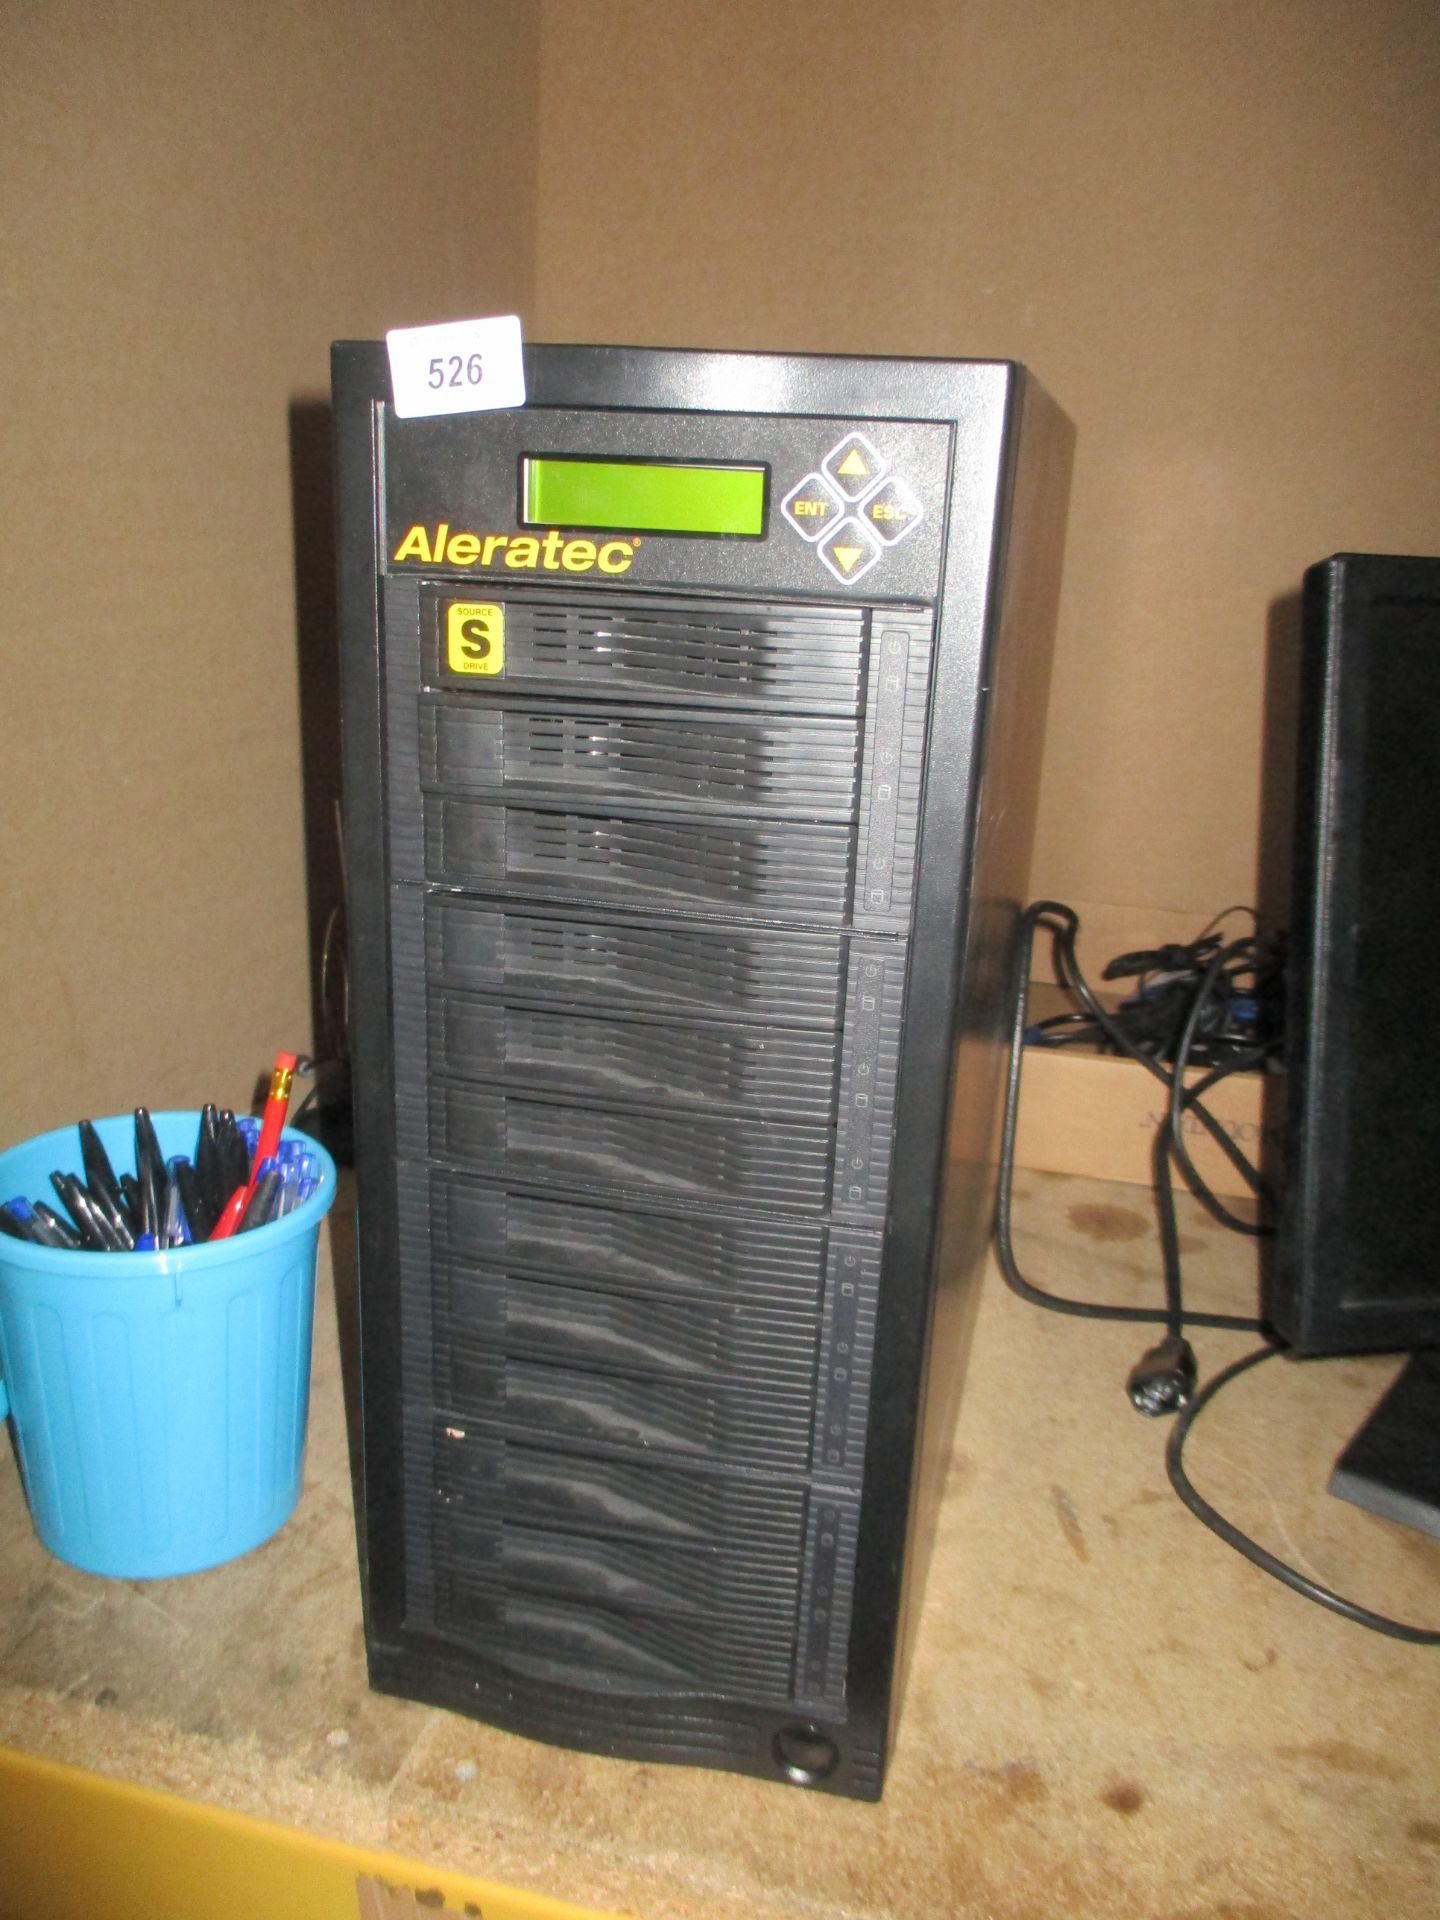 An Aleratec server complete with power lead